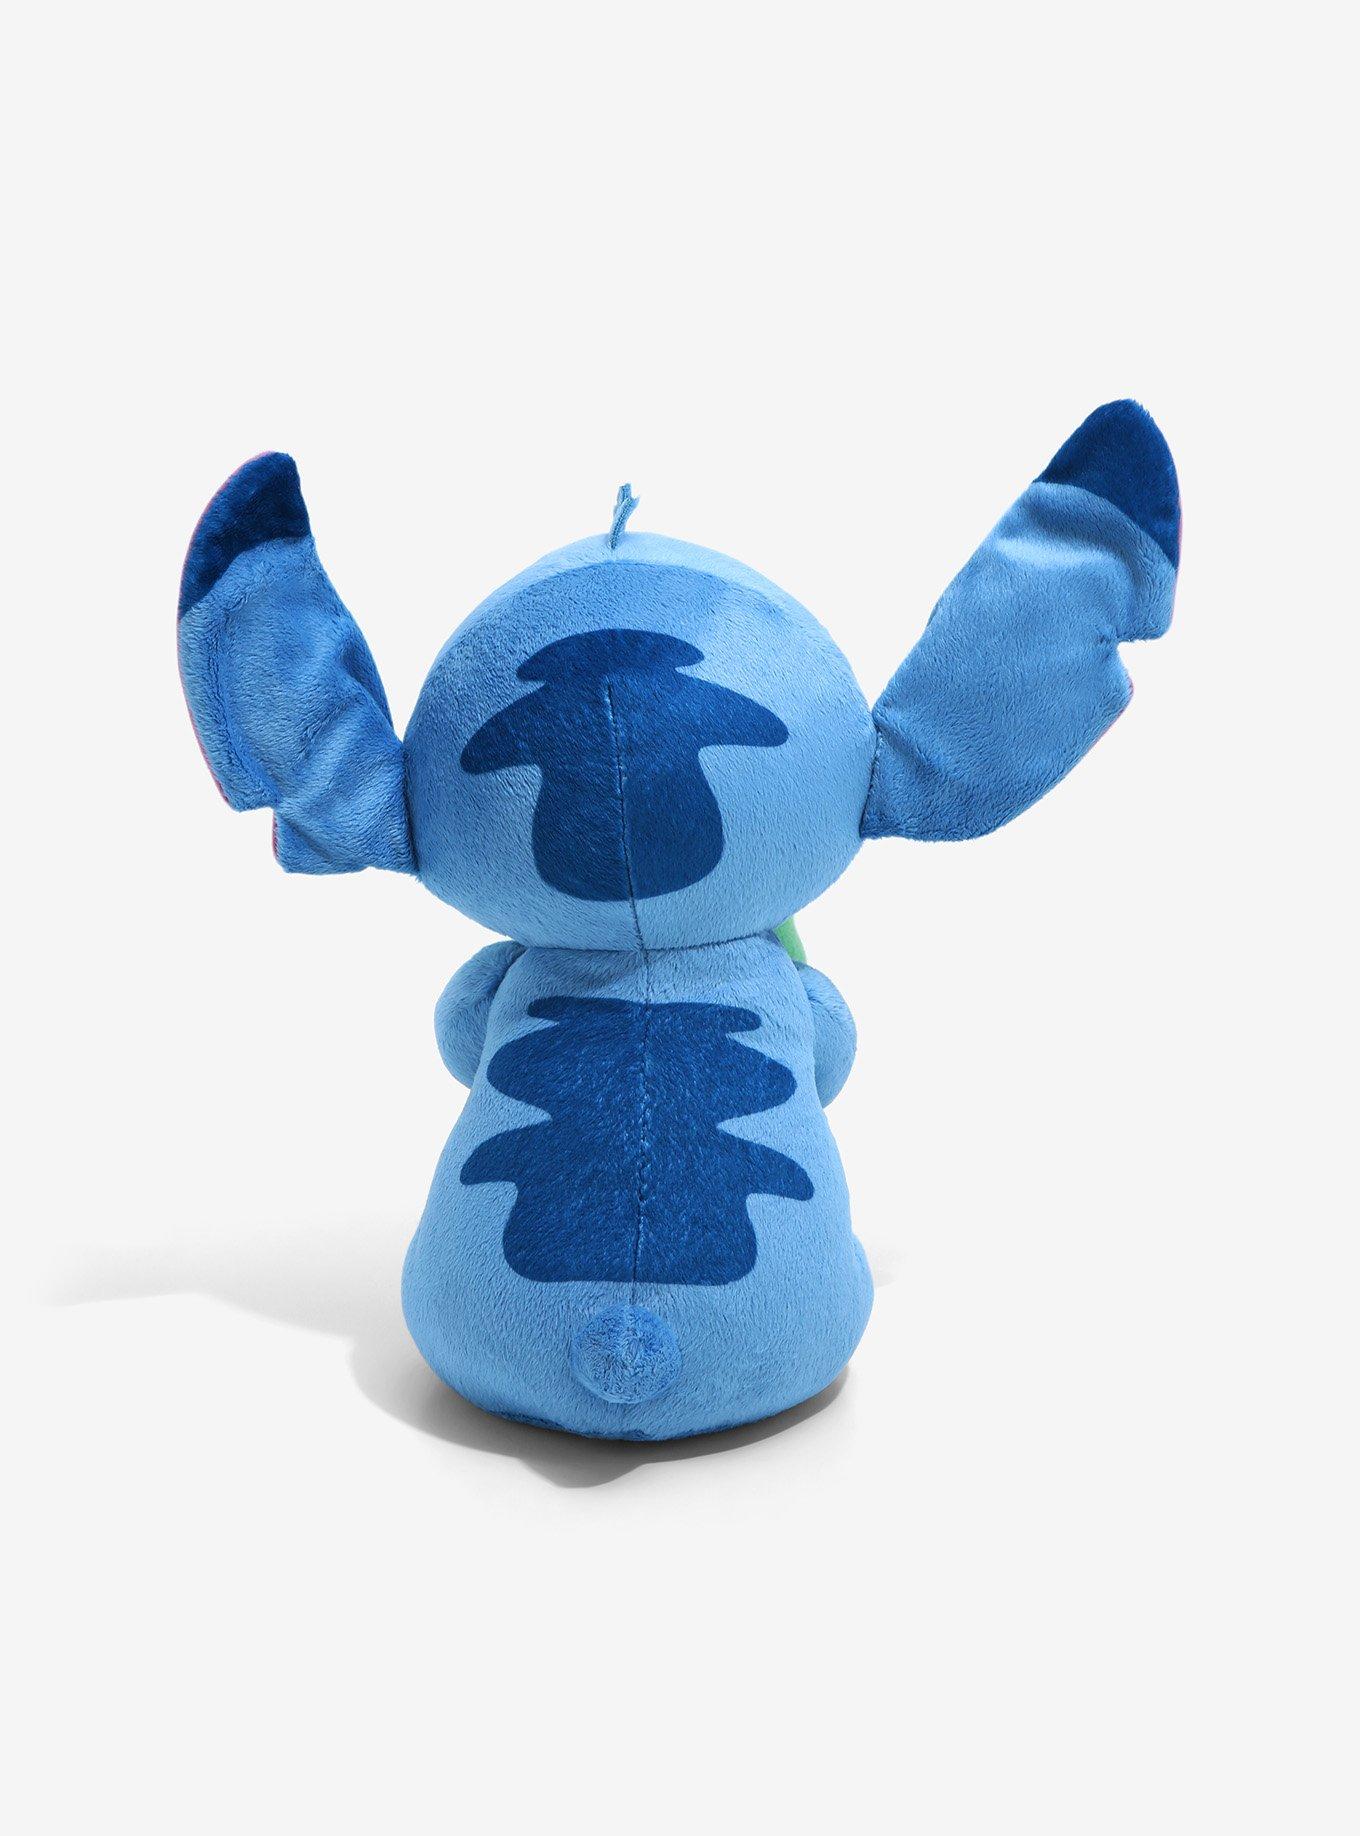 Disney Street Beach Large Plush Stitch, 17-Inch Stuffed Animal, Alien,  Disney's Lilo and Stitch, Officially Licensed Kids Toys for Ages 2 Up